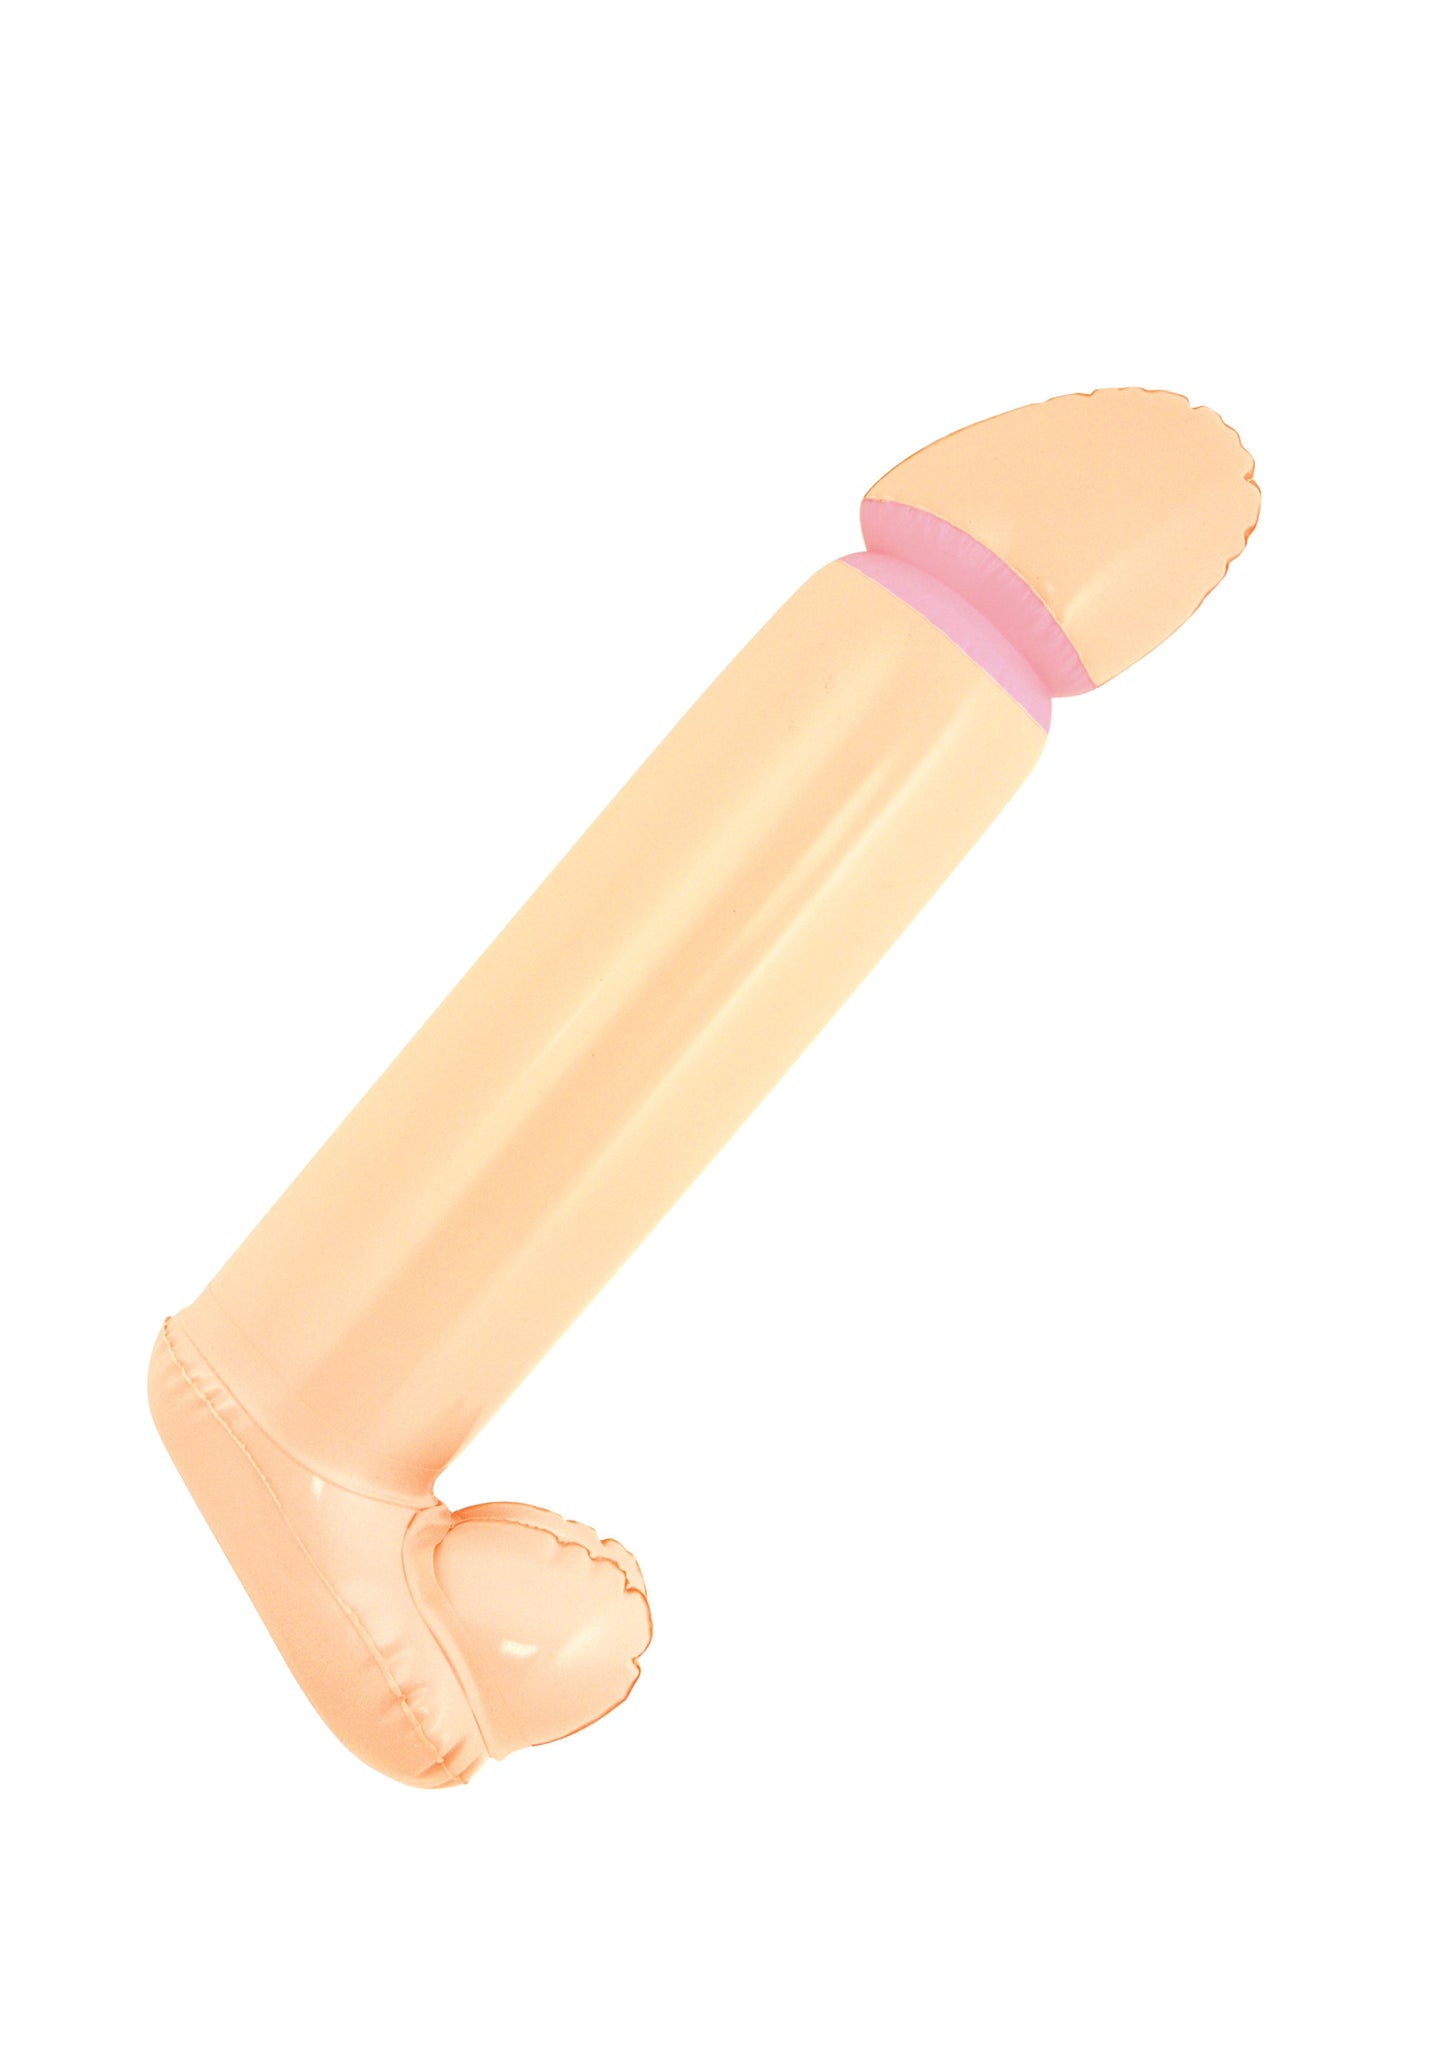 Inflatable Willy - 90cm Henbrandt